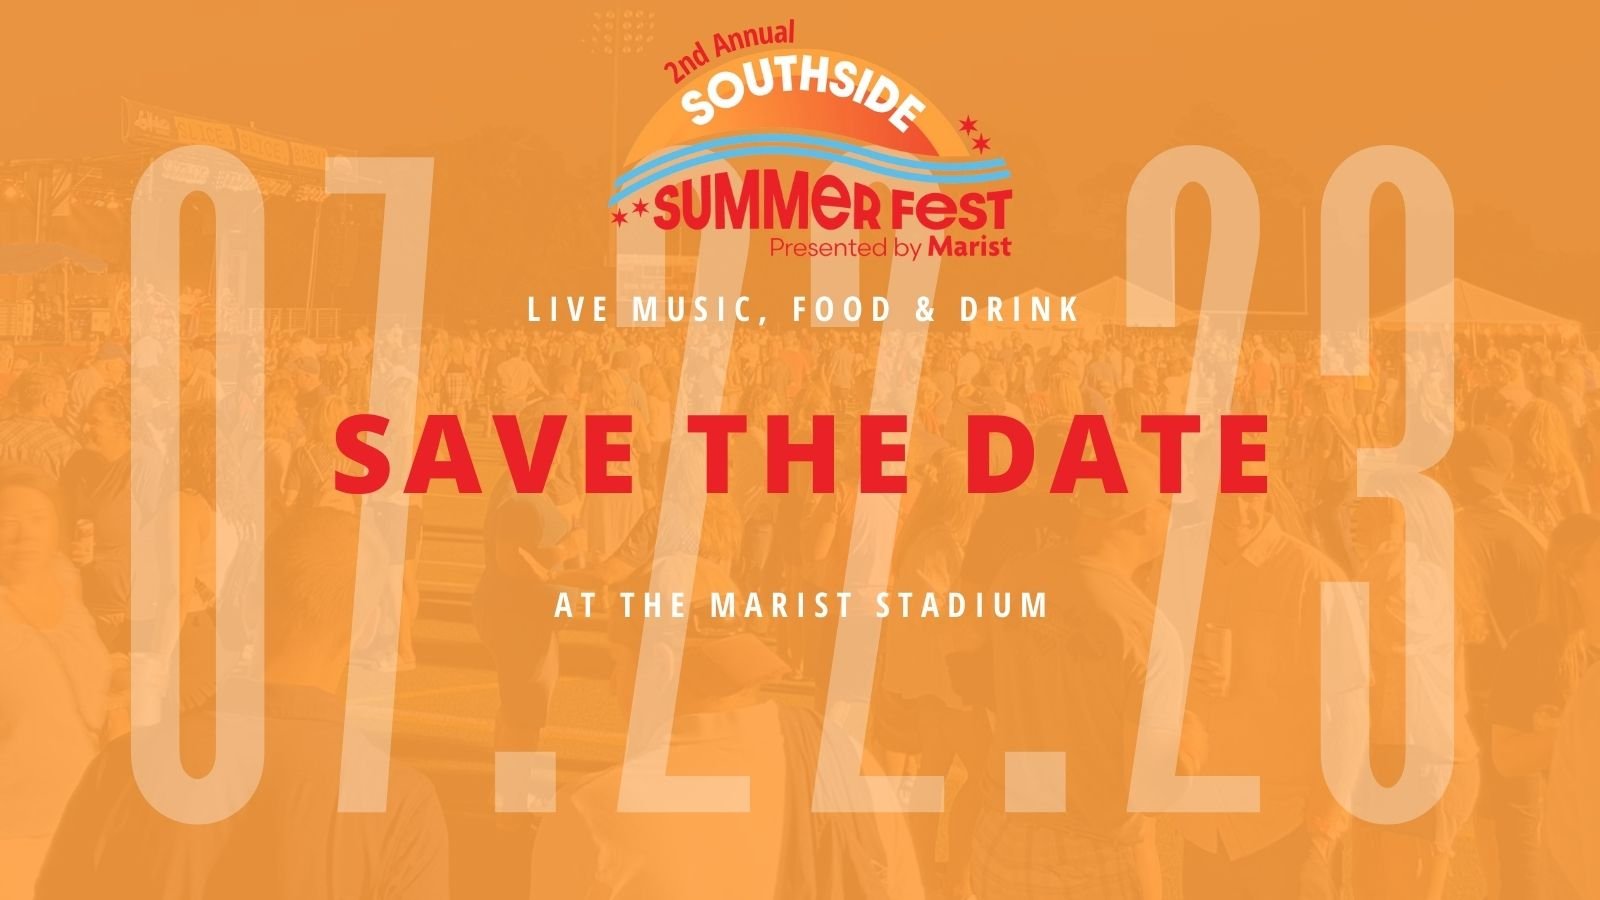 Save The Date 2nd Southside SummerFest